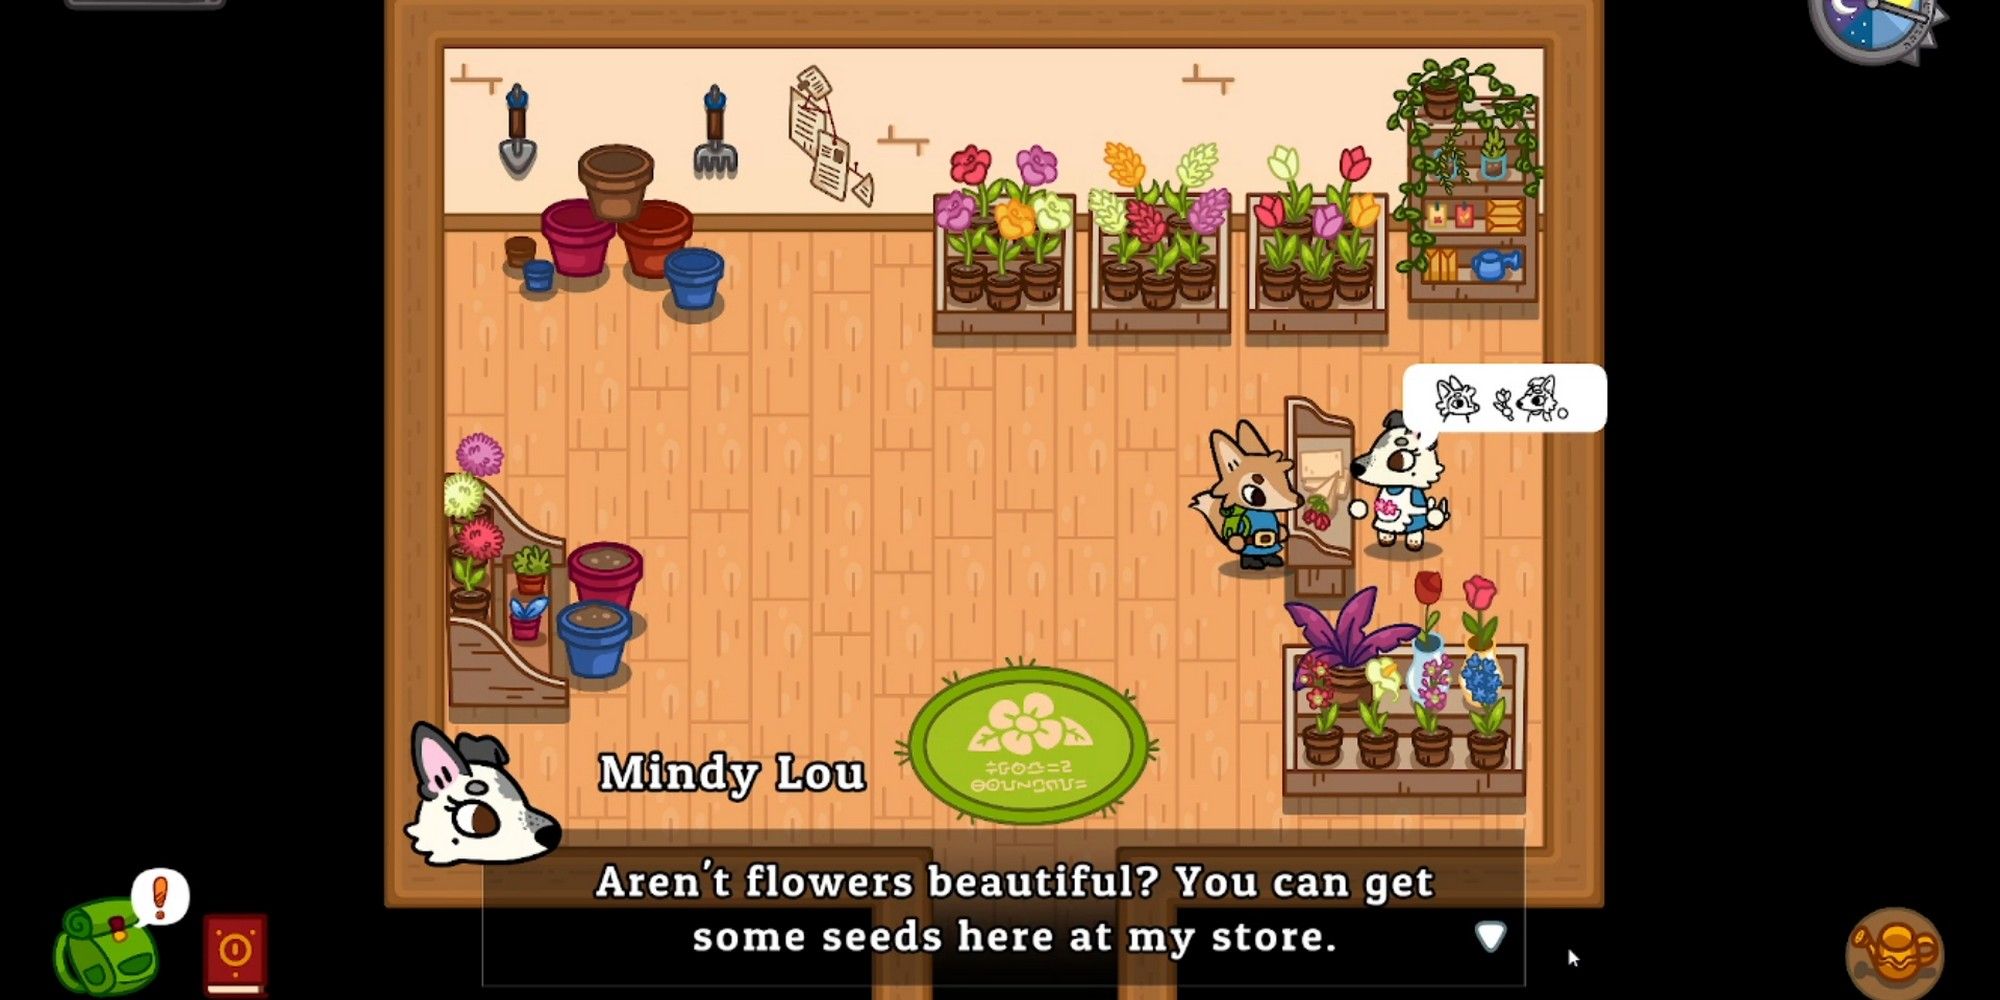 ken talking to mindy lou about flowers in her store lonesome village